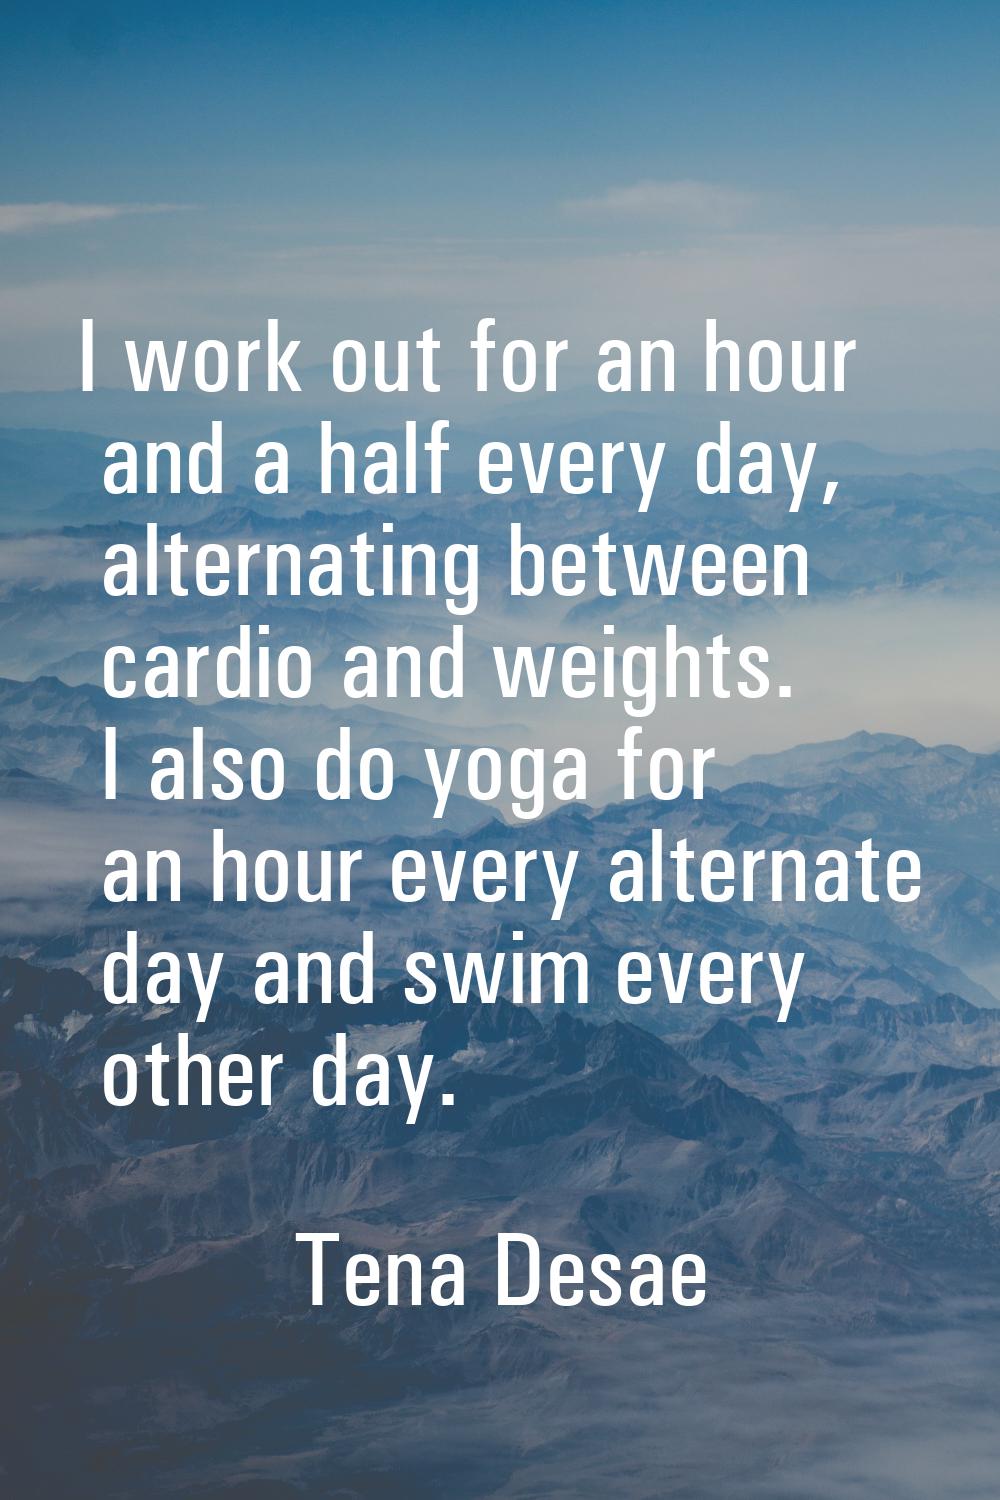 I work out for an hour and a half every day, alternating between cardio and weights. I also do yoga